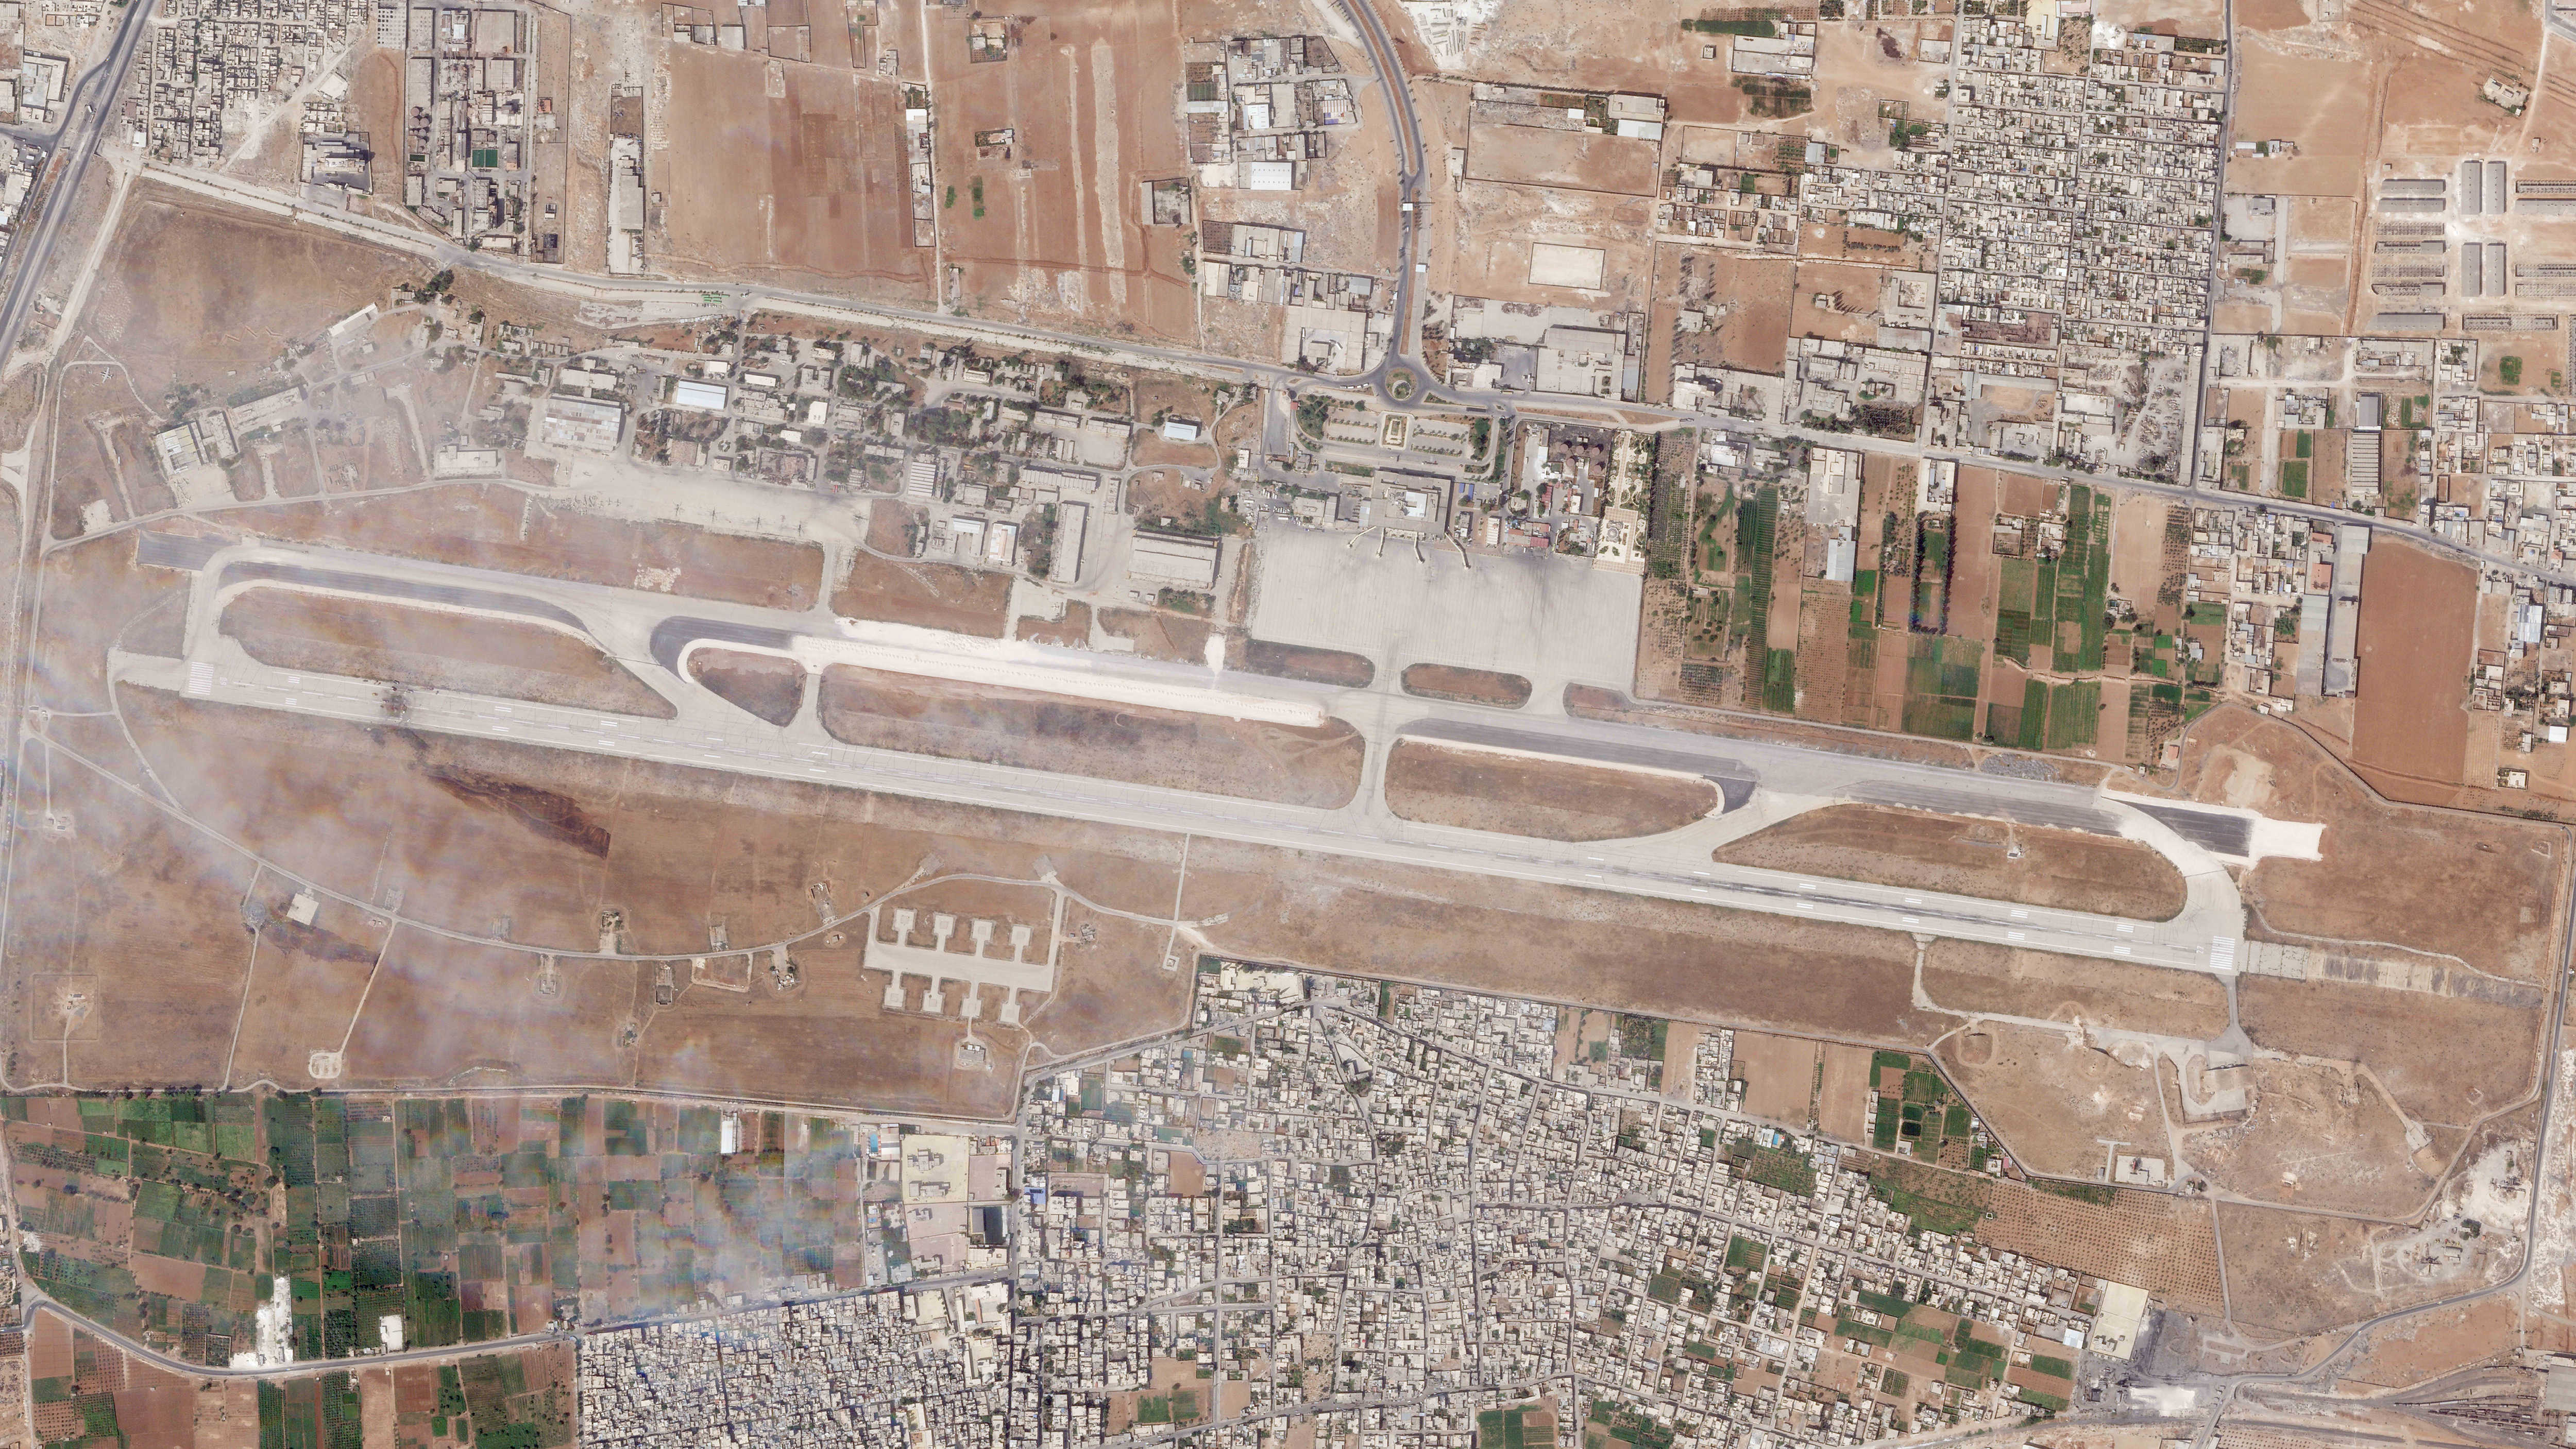 An Israeli attack targeting a Syrian airport tore a hole in the runway and also damaged a nearby piece of tarmac and structure on the military side of the airfield